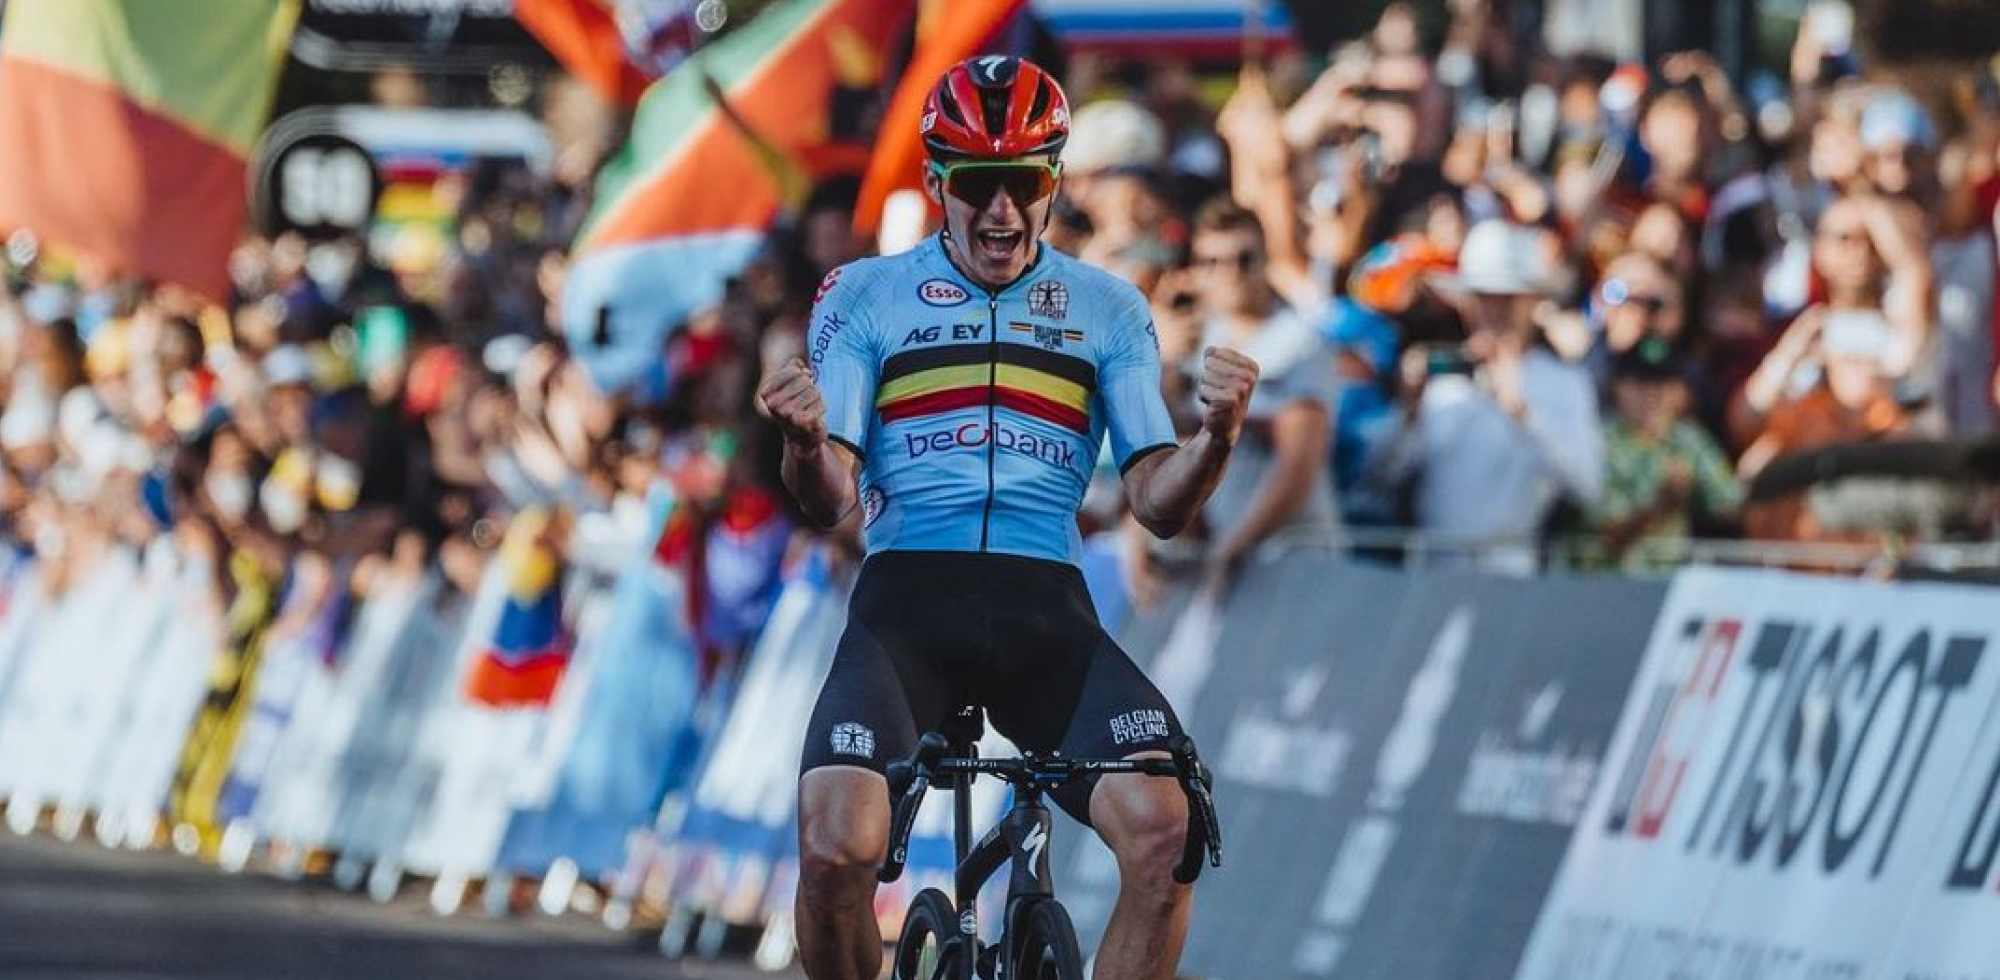 Remco Evenepoel claiming victory at the 2022 World Championships